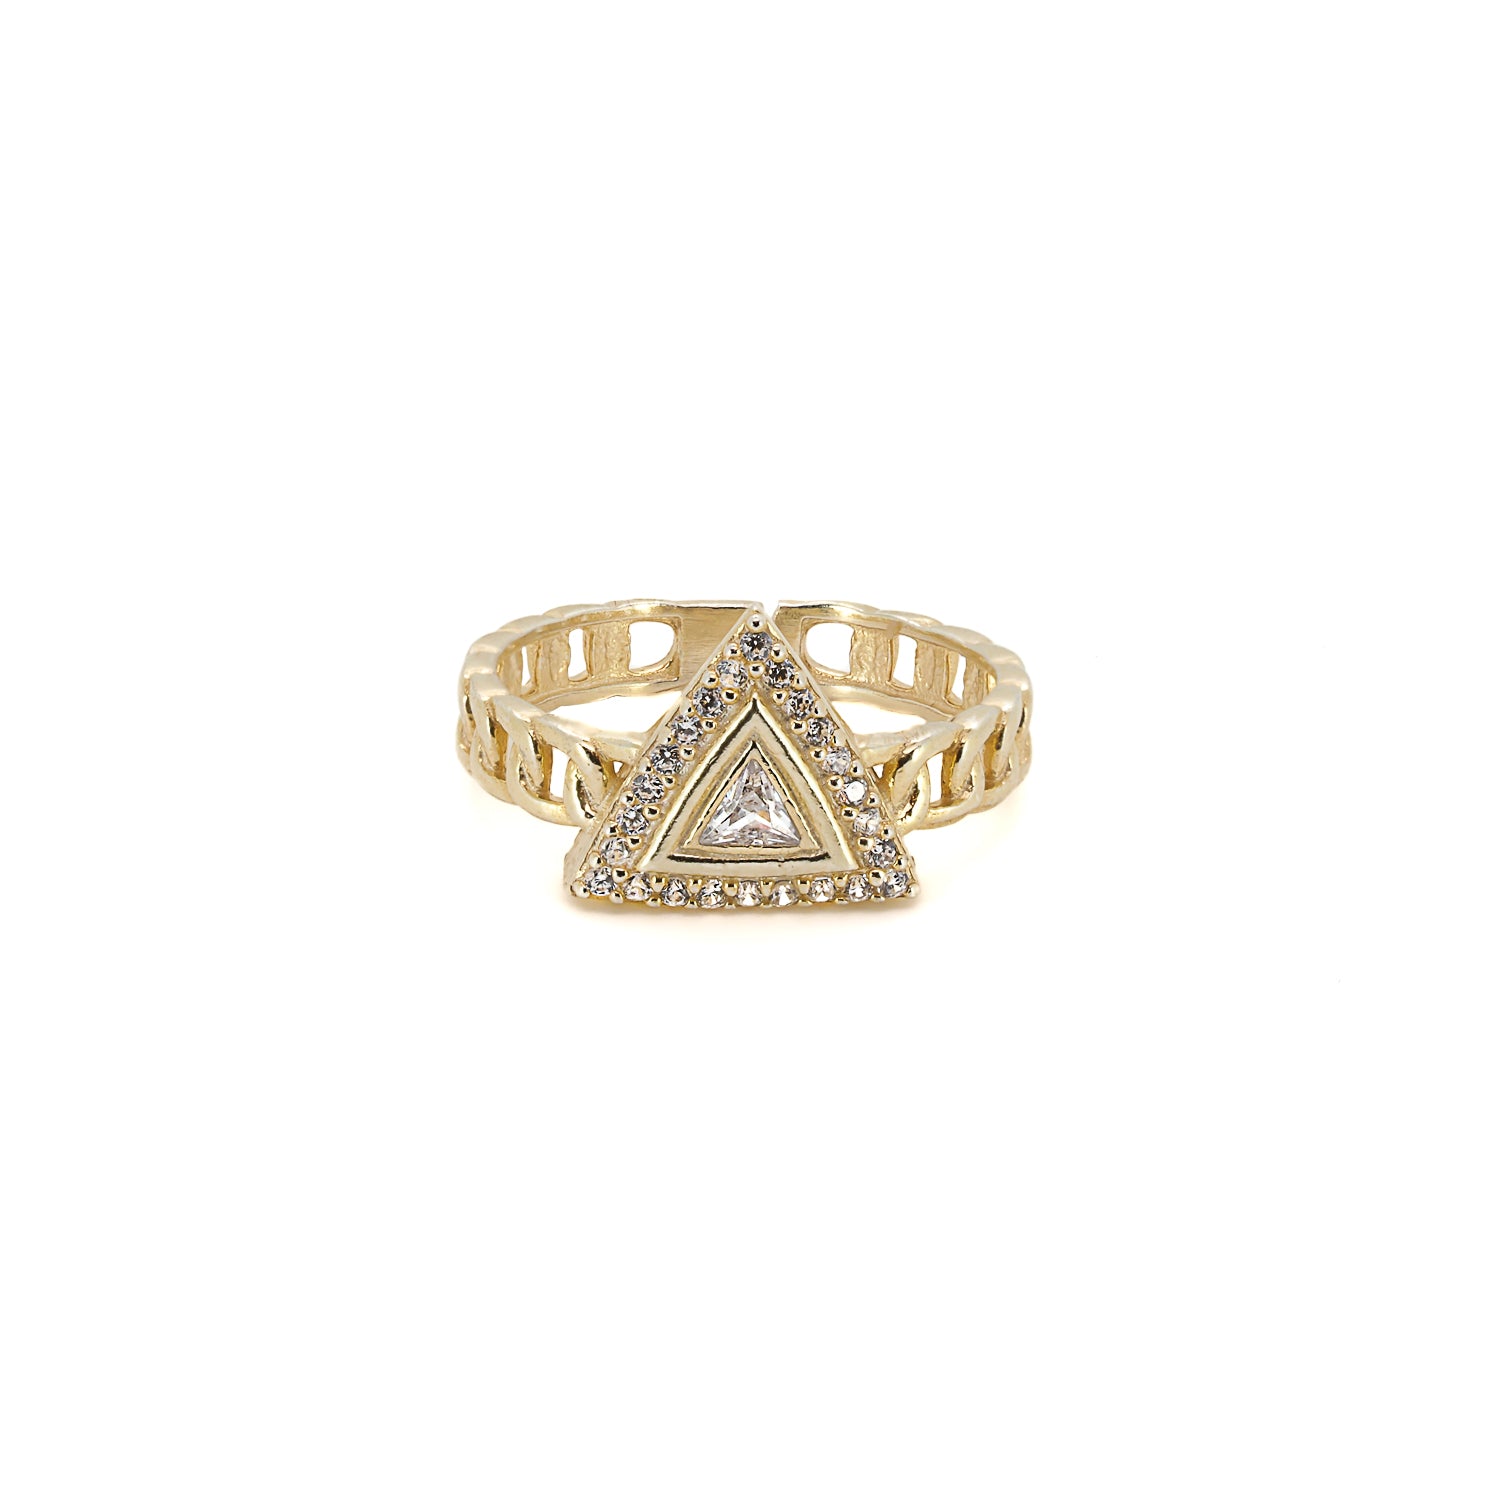 The intricate details of the Gold Vermeil Diamond Ring shine through.